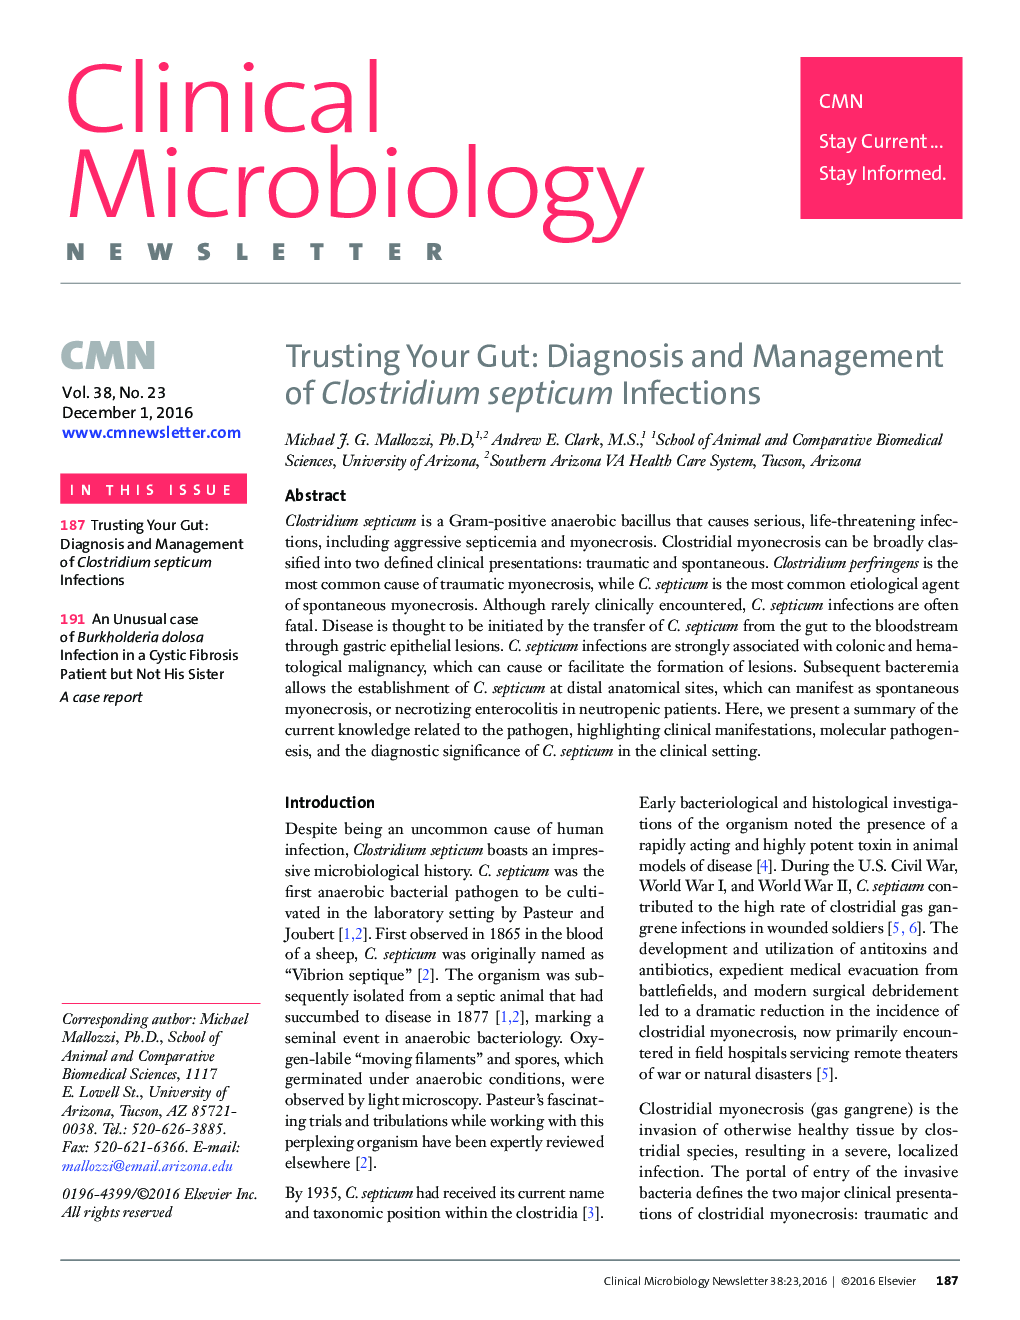 Trusting Your Gut: Diagnosis and Management of Clostridium septicum Infections